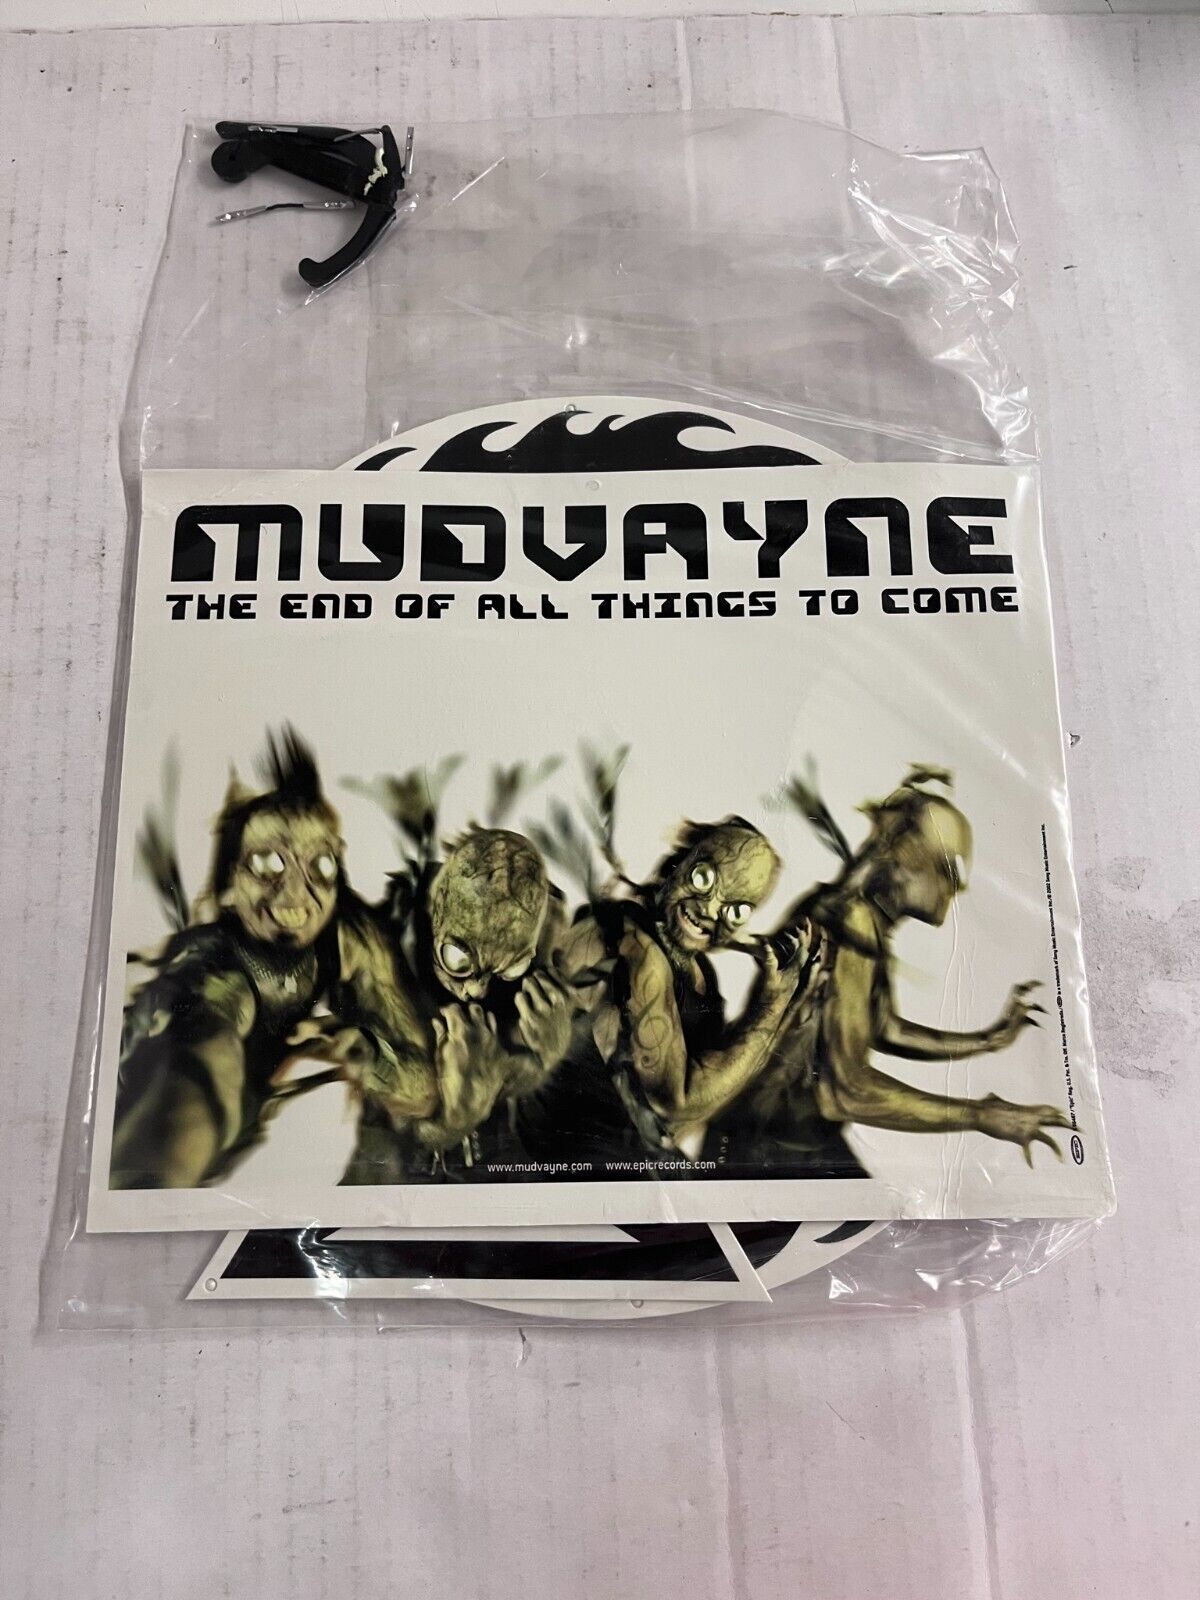 Mudvayne End Of All Things To Come Hanging Mobile Promo Display New! Unused 2002